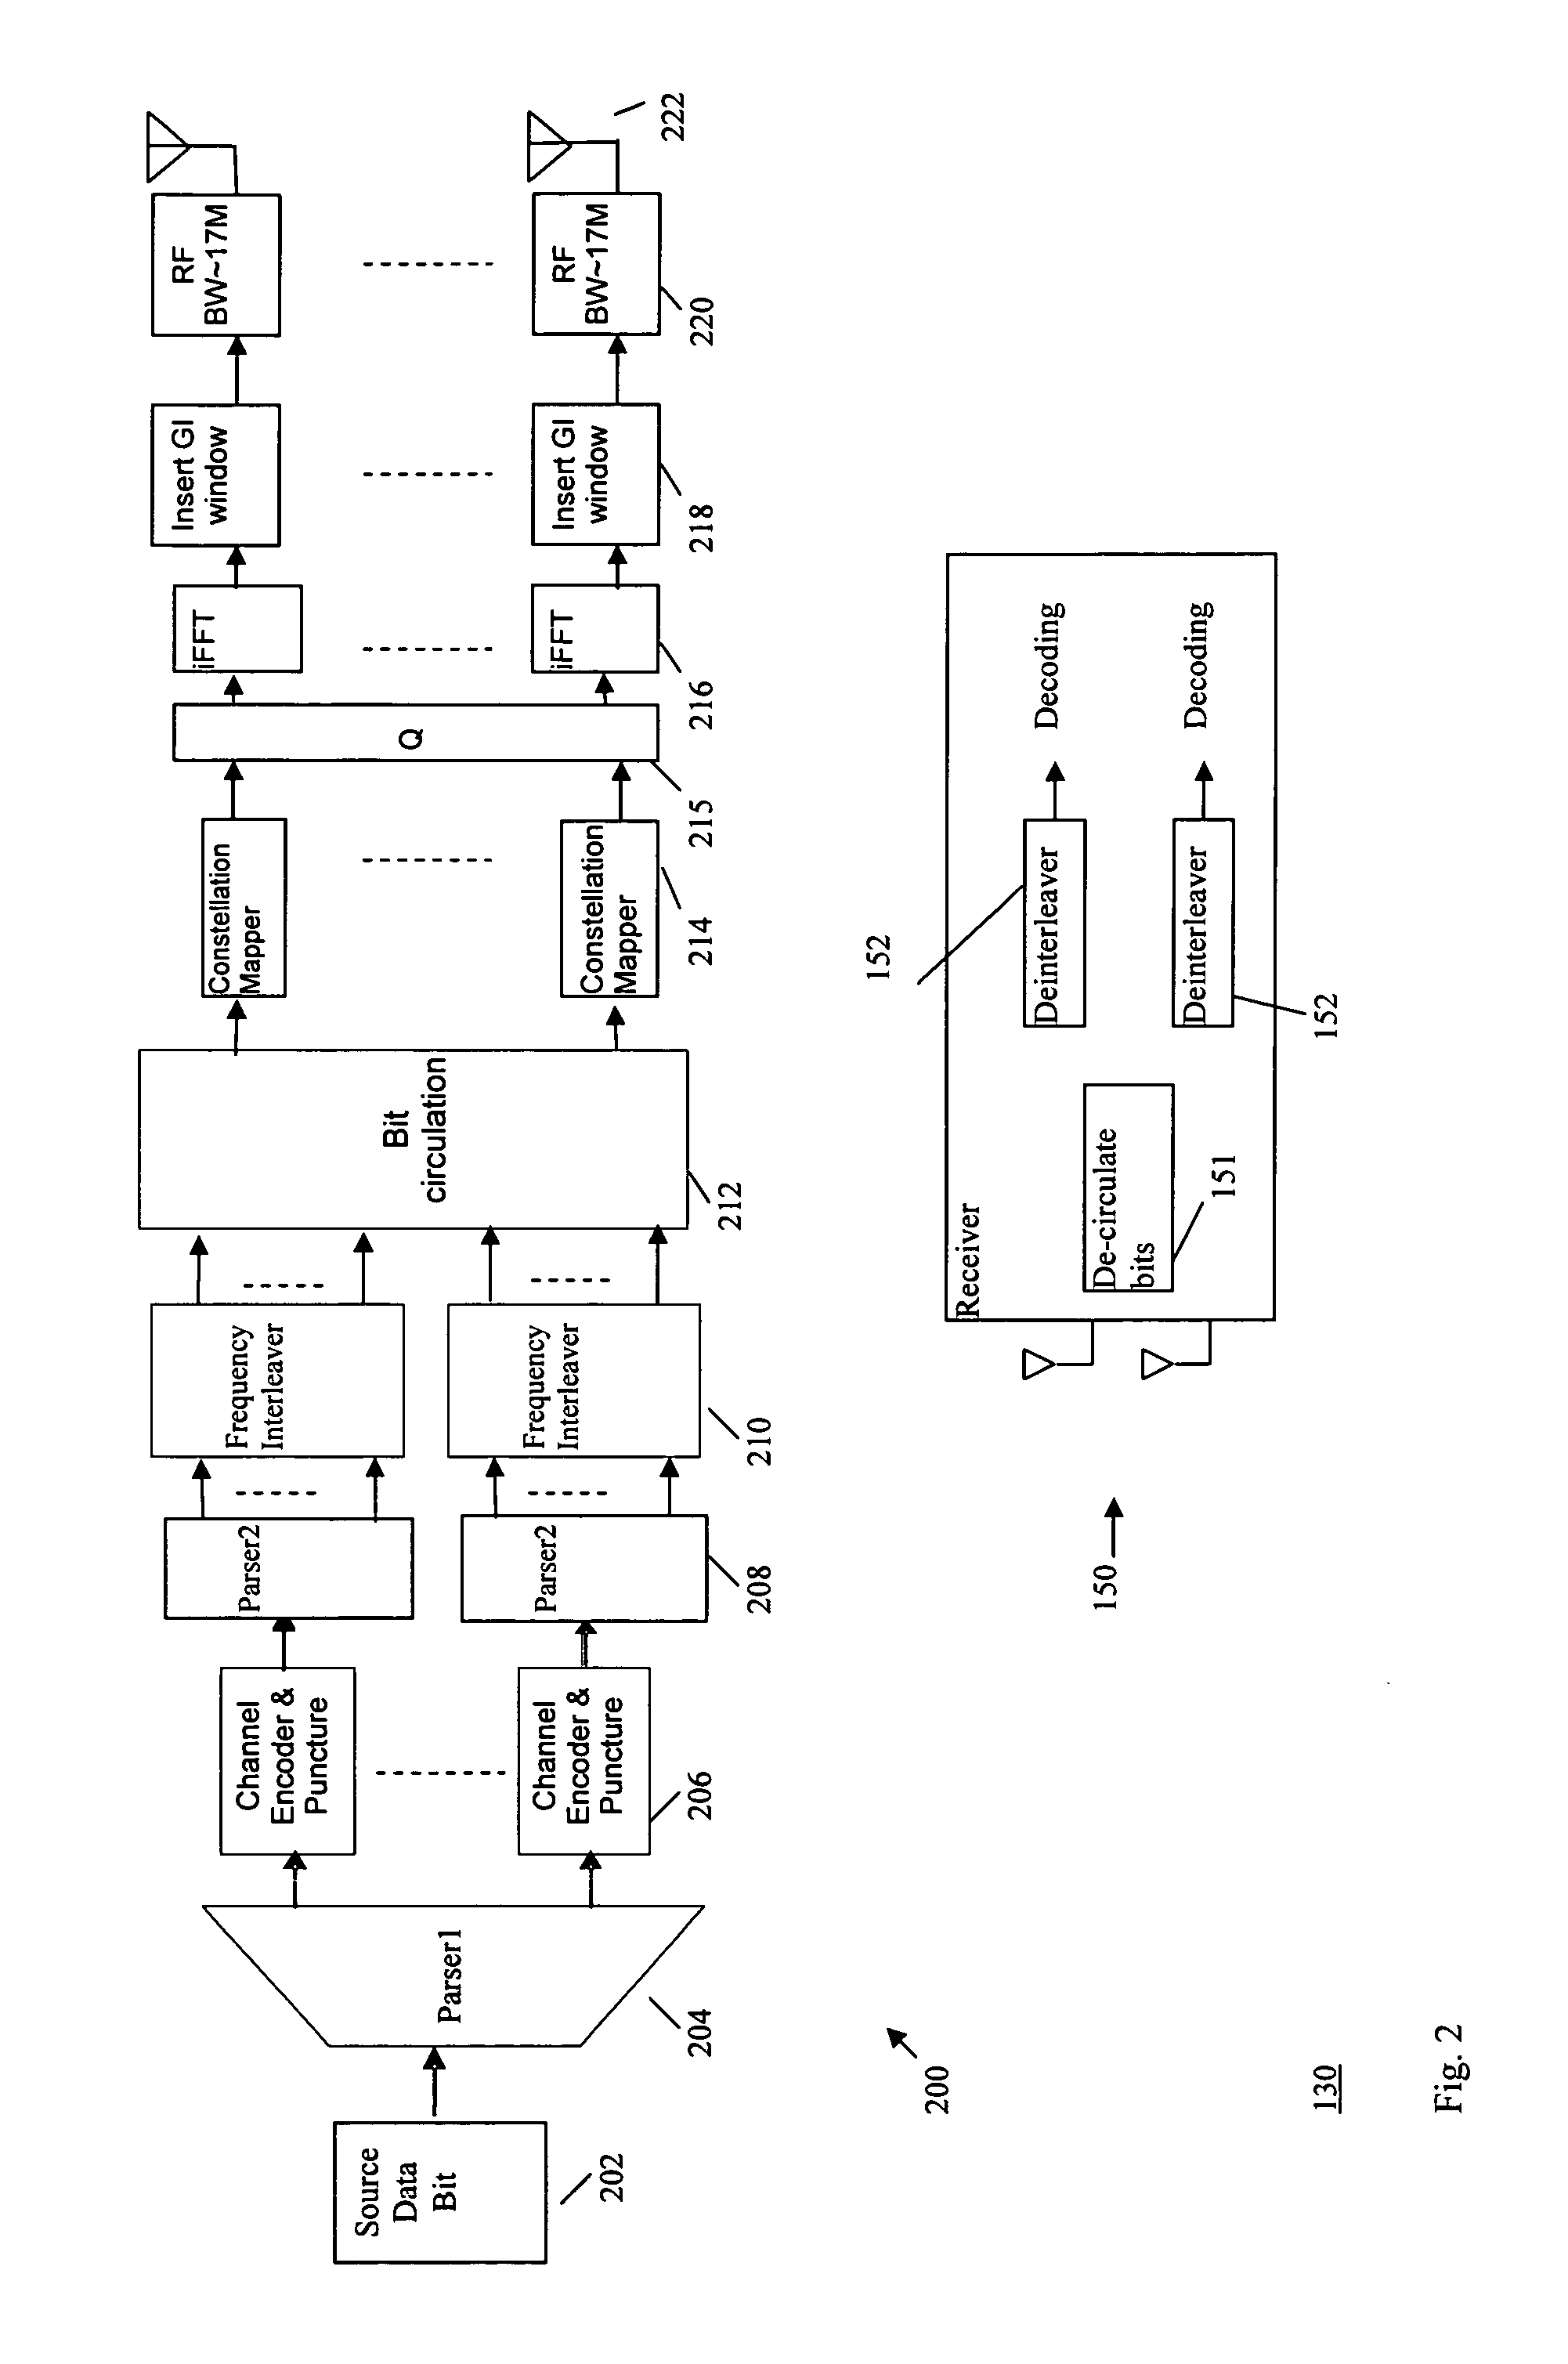 Interleaver design with multiple encoders for more than two transmit antennas in high throughput WLAN communication systems